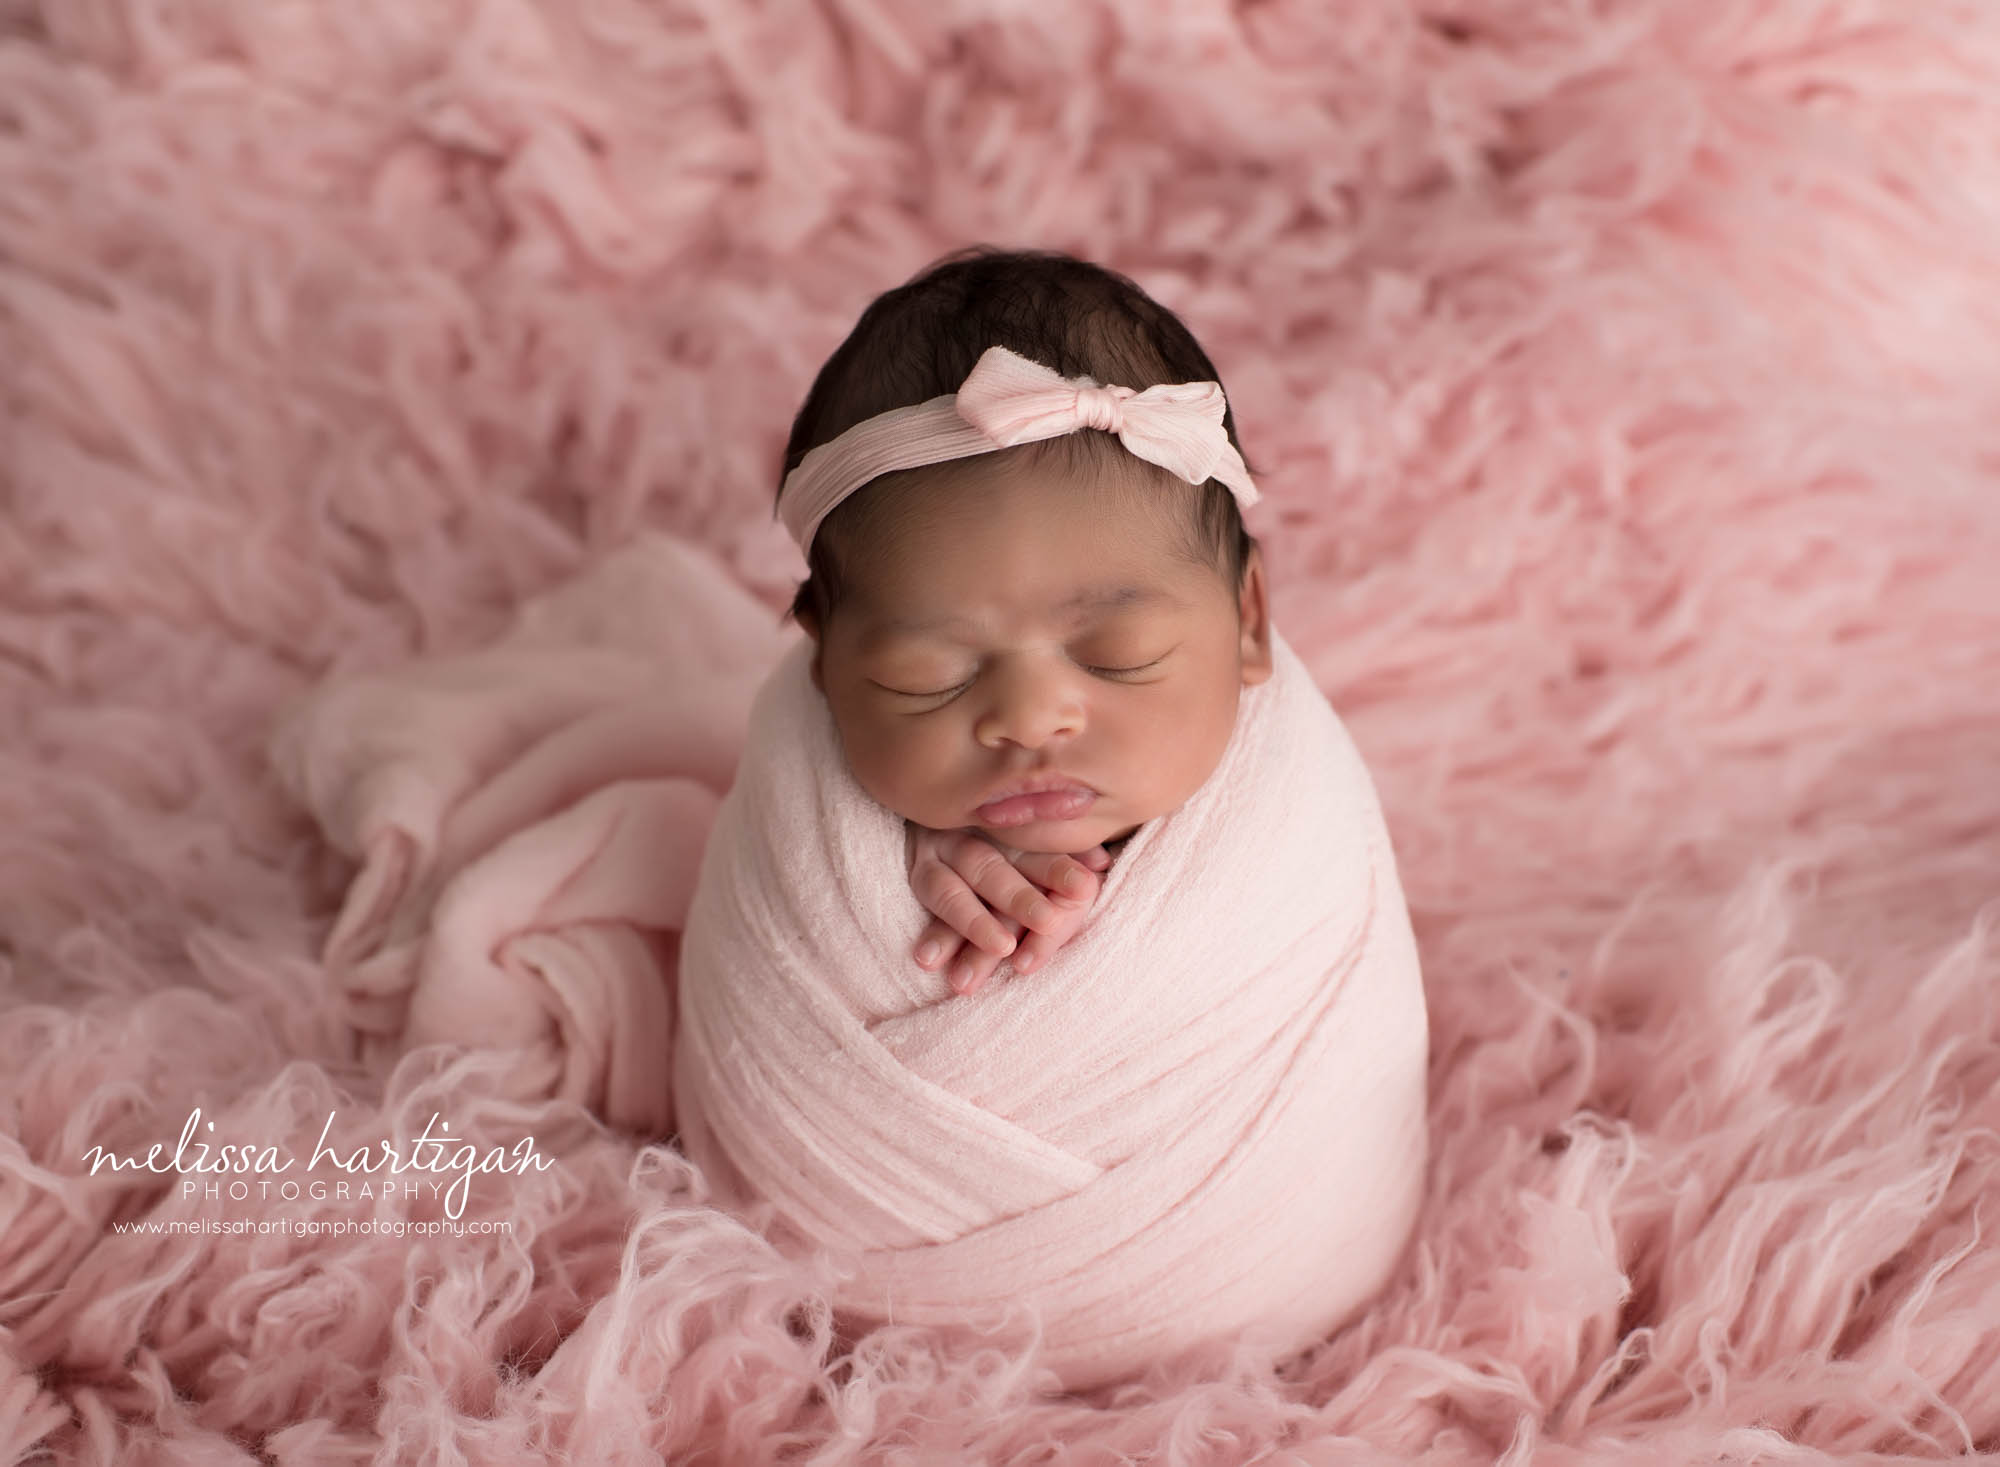 baby girl wrapped in pink wrap with bow headband pose don pink flokati rug fur